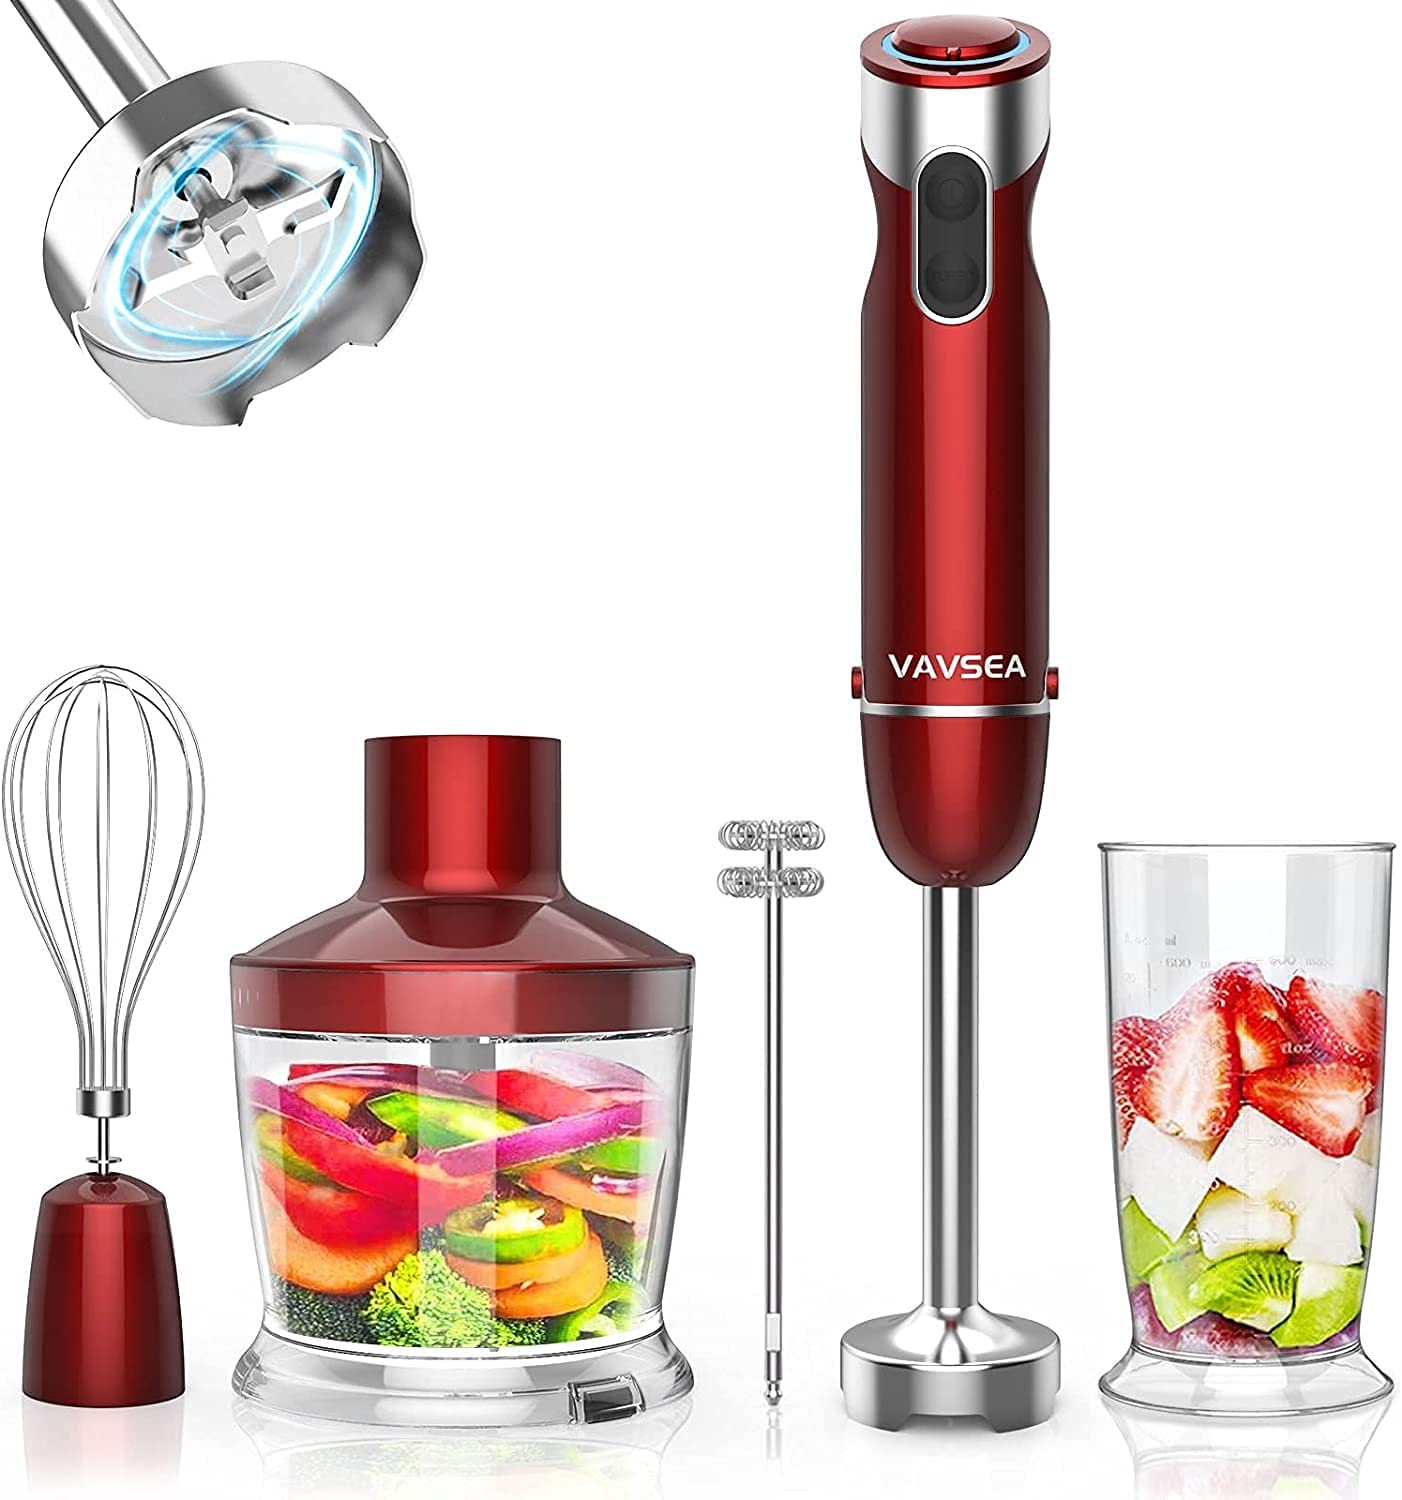 VAVSEA 1000W 5-in-1 Immersion hand Blender, 12 Speed Stick Blender with  Mixing B